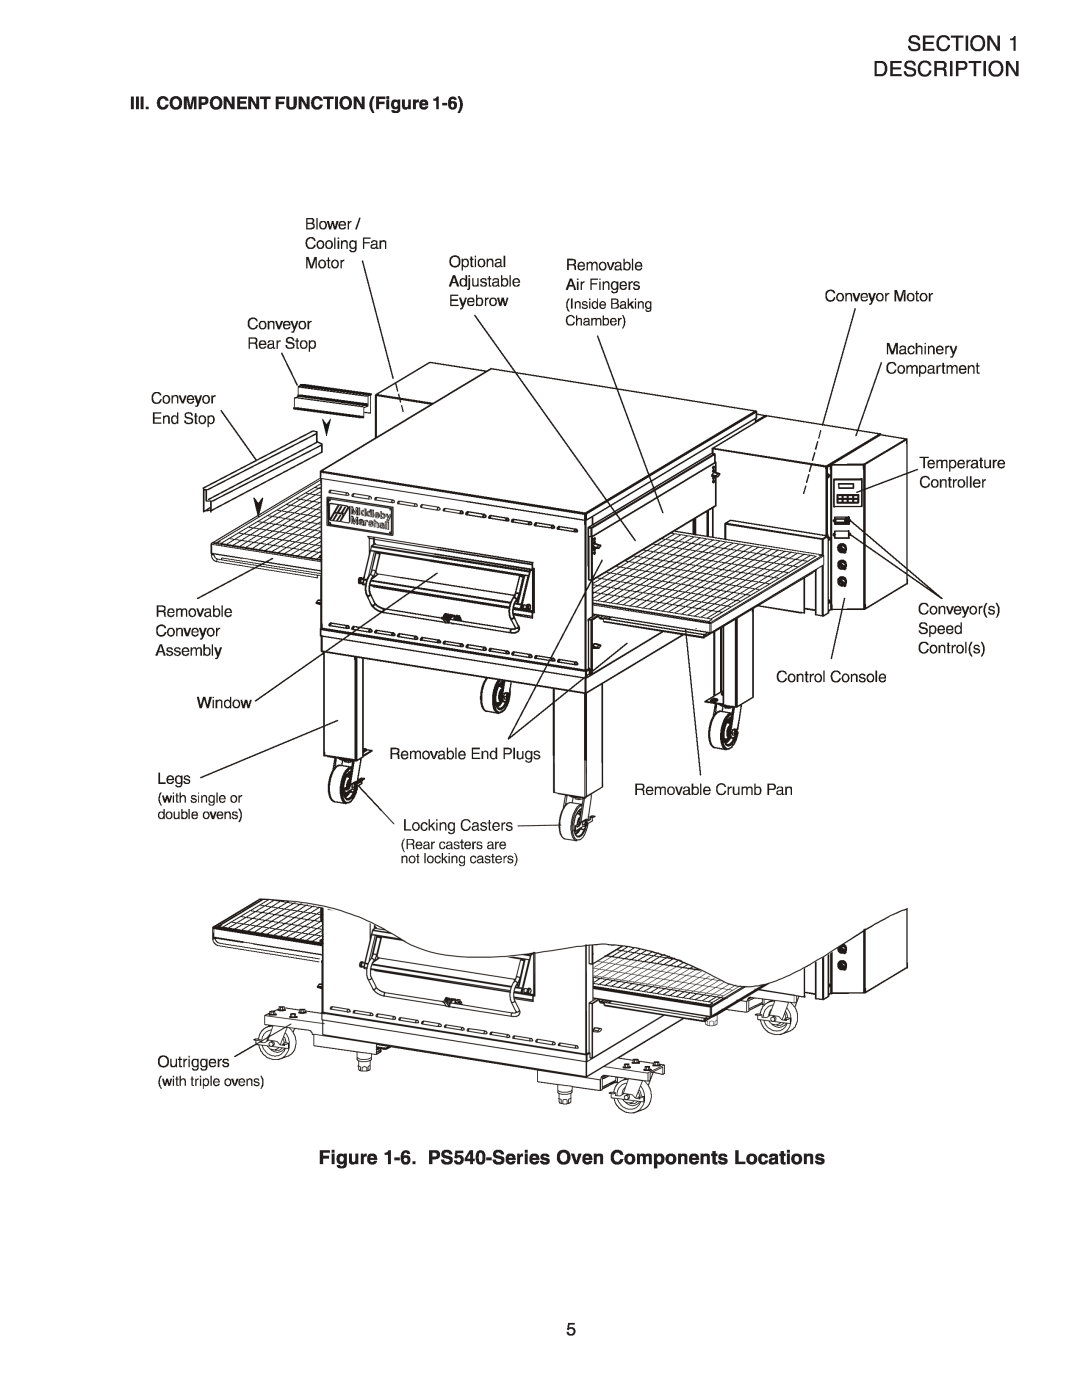 Middleby Marshall PS540G Section Description, 6. PS540-Series Oven Components Locations, III. COMPONENT FUNCTION Figure 